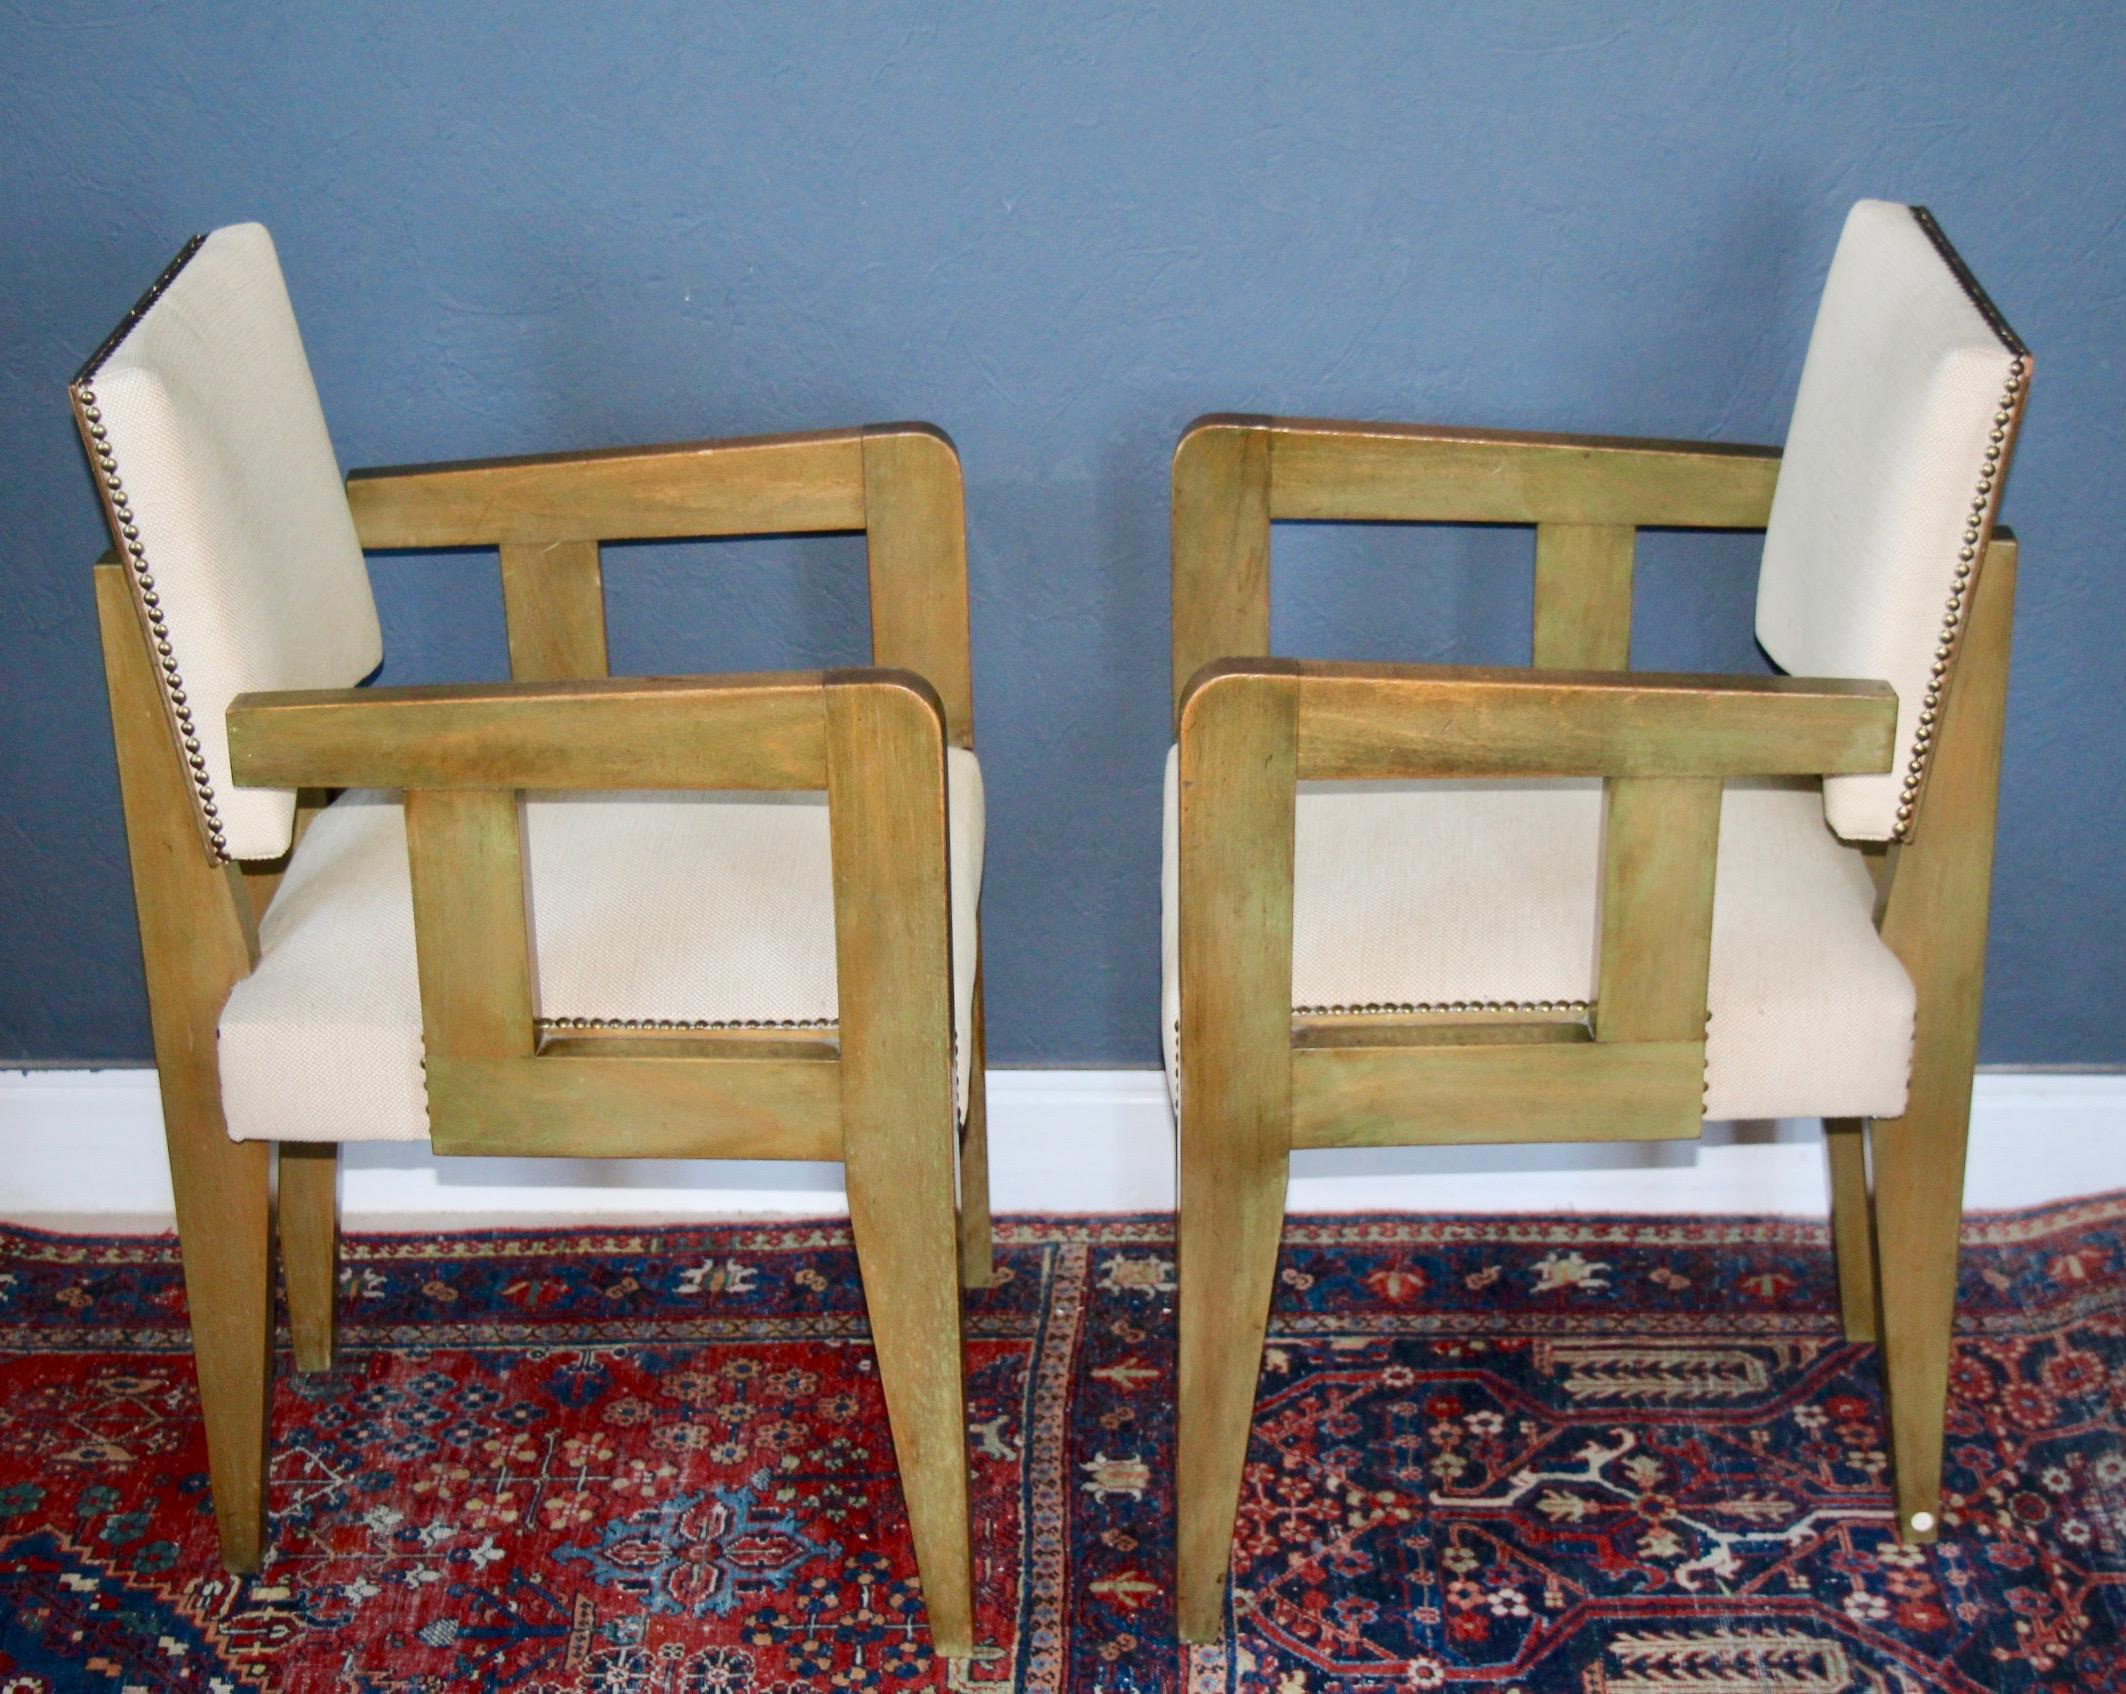 Pair of bridge chairs stained Oregon pine on the back side , lacquer olive green color  wood, brass nail-heads and fabric upholstery, each underside stamped 'BREVETE SORNAY/FRANCE ETRANGER'